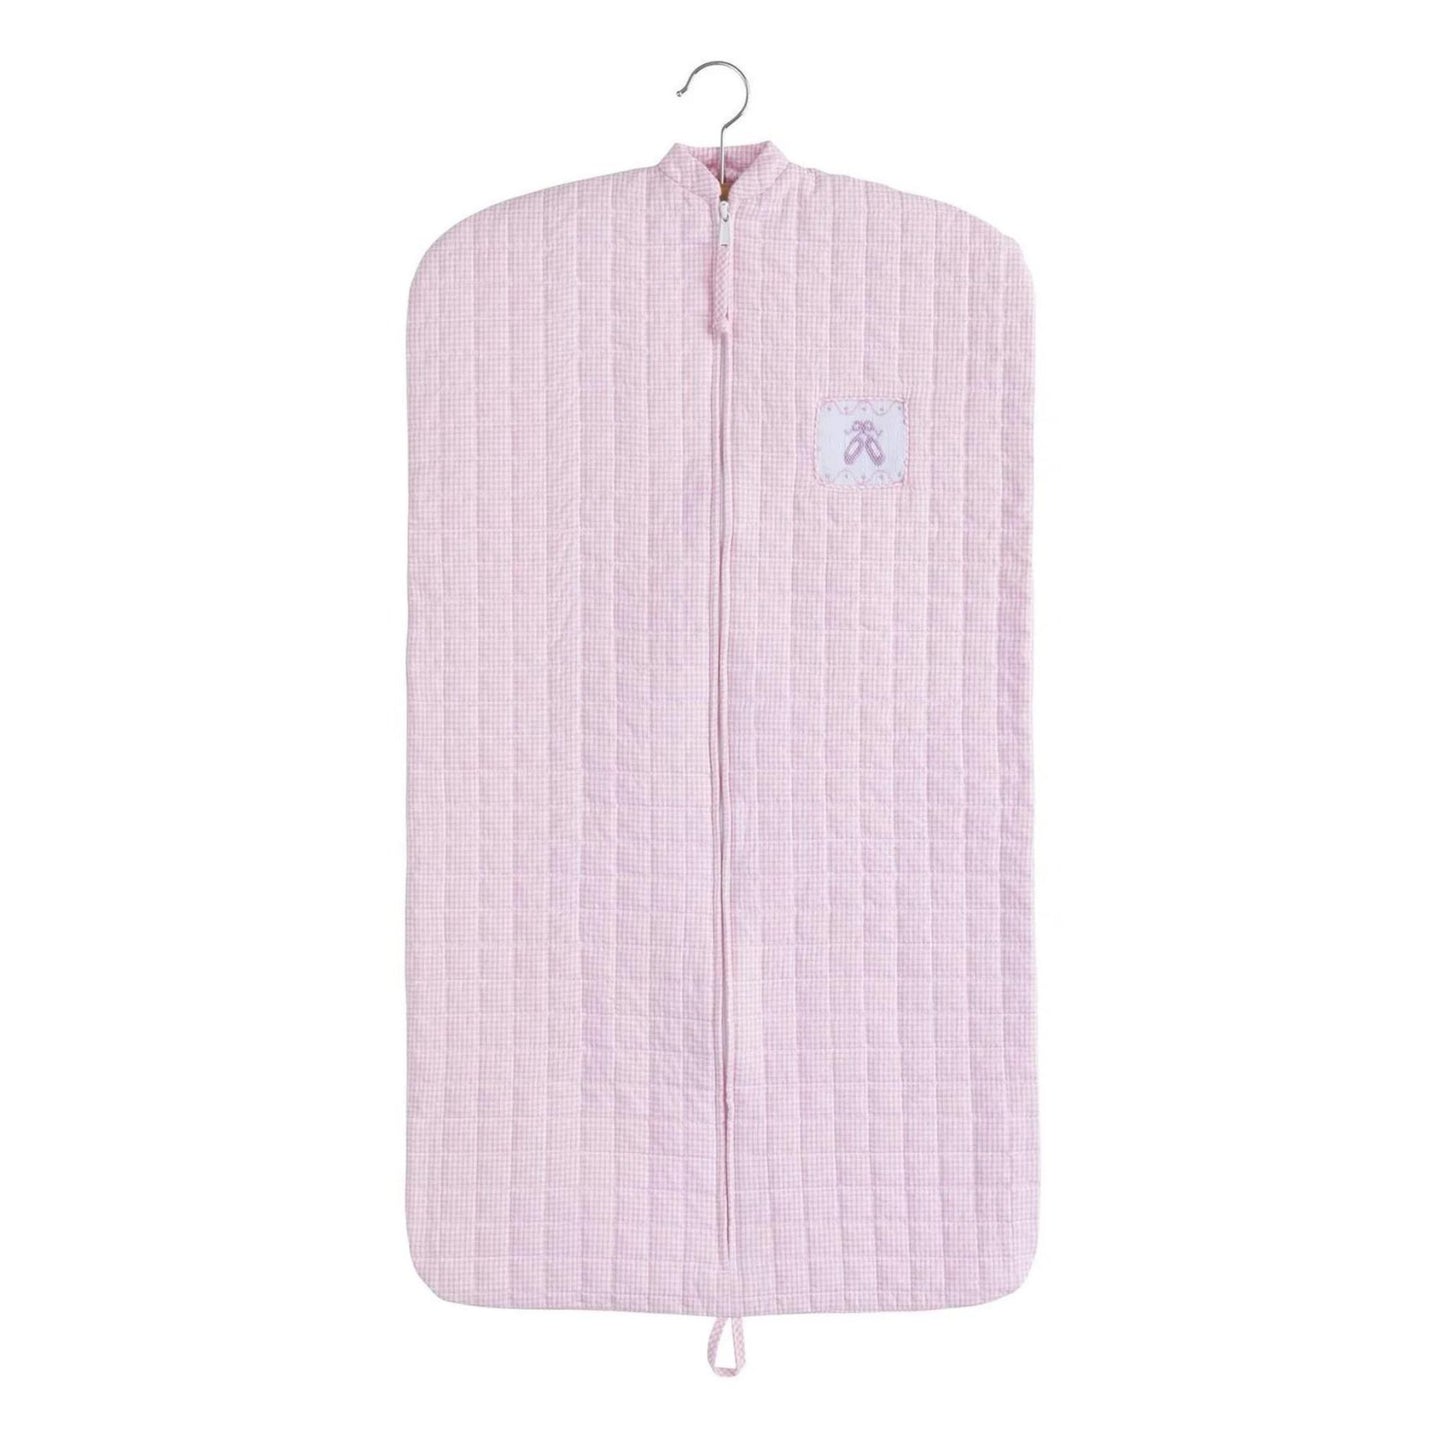 Girls Quilted Garment